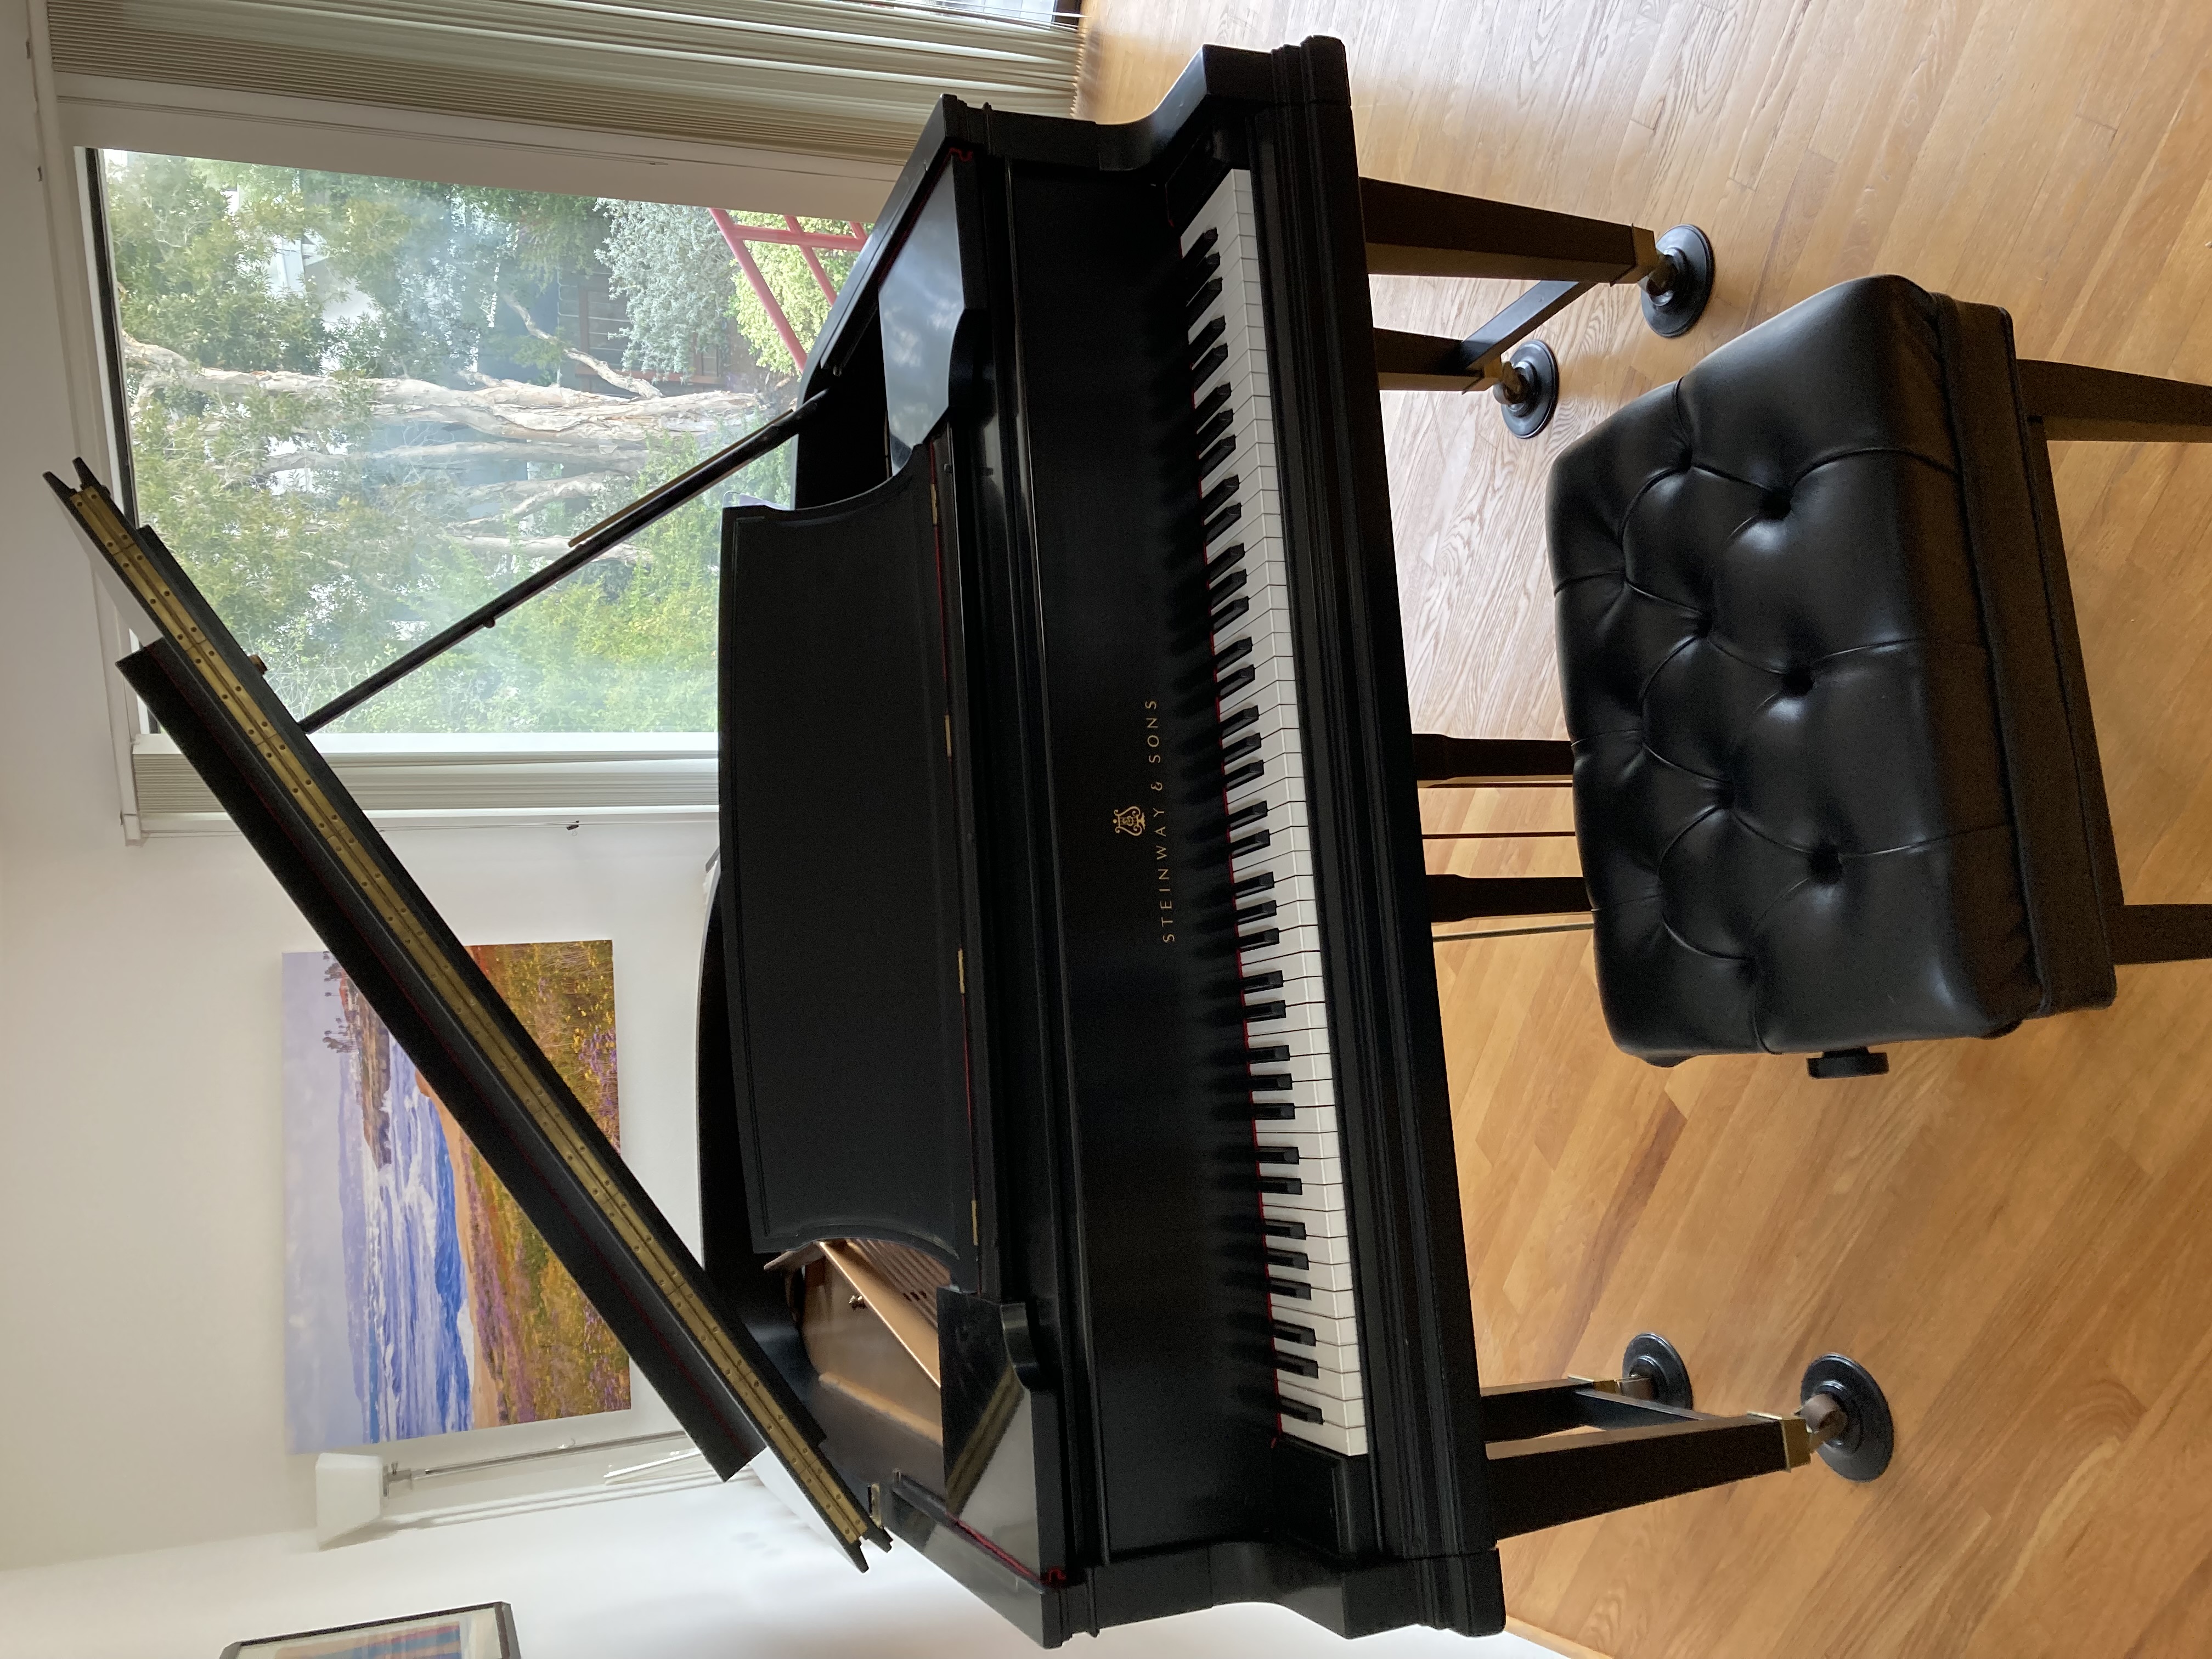 Rare opportunity to own a 7’ Steinway A3 with PianoDisc